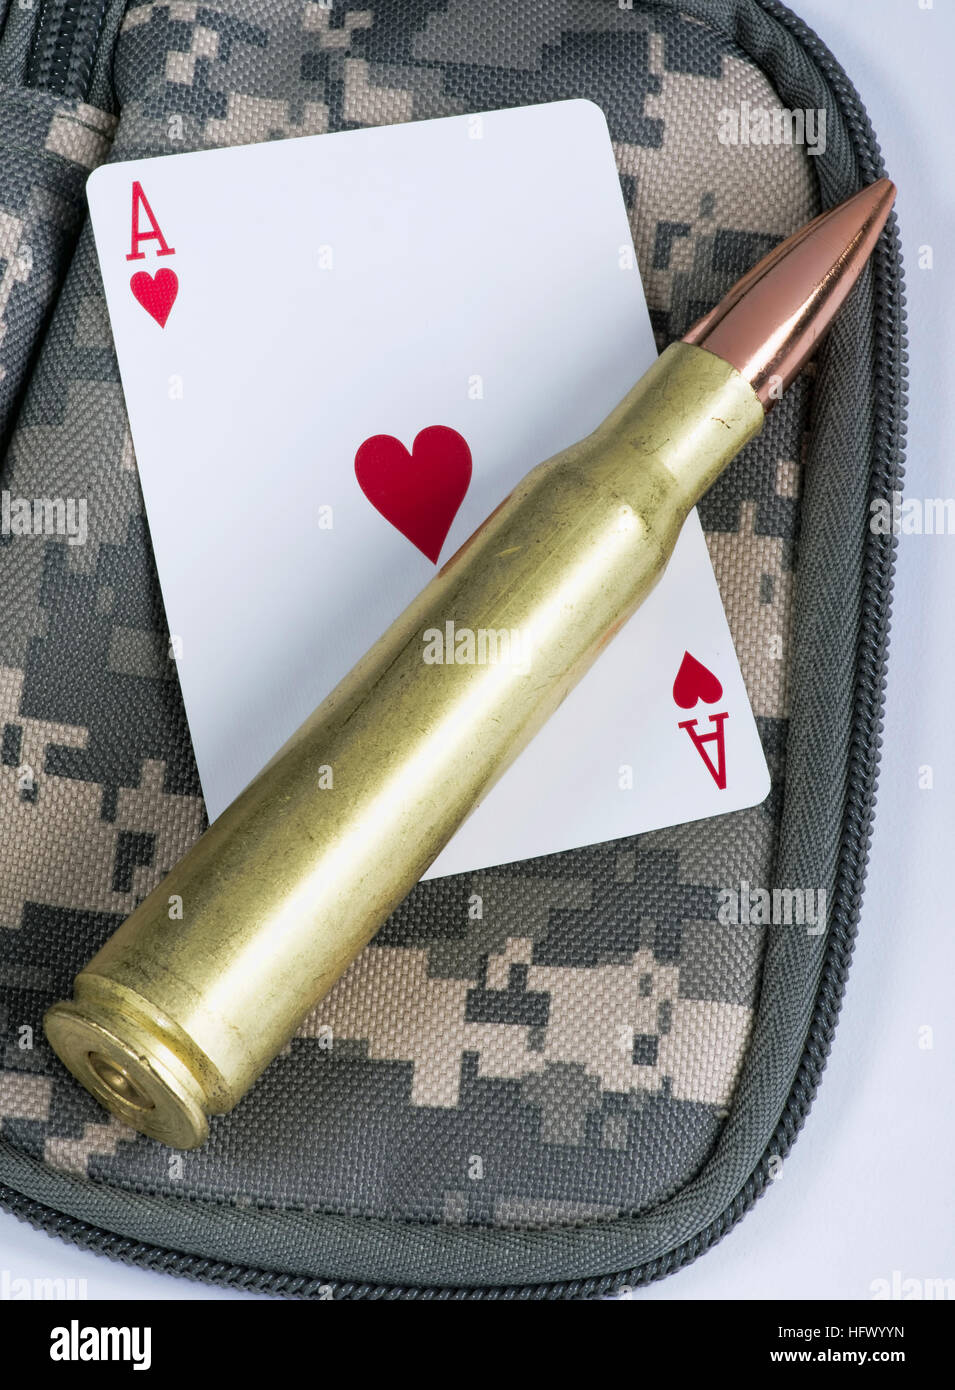 Ace of hearts and fifty caliber bullet. Stock Photo